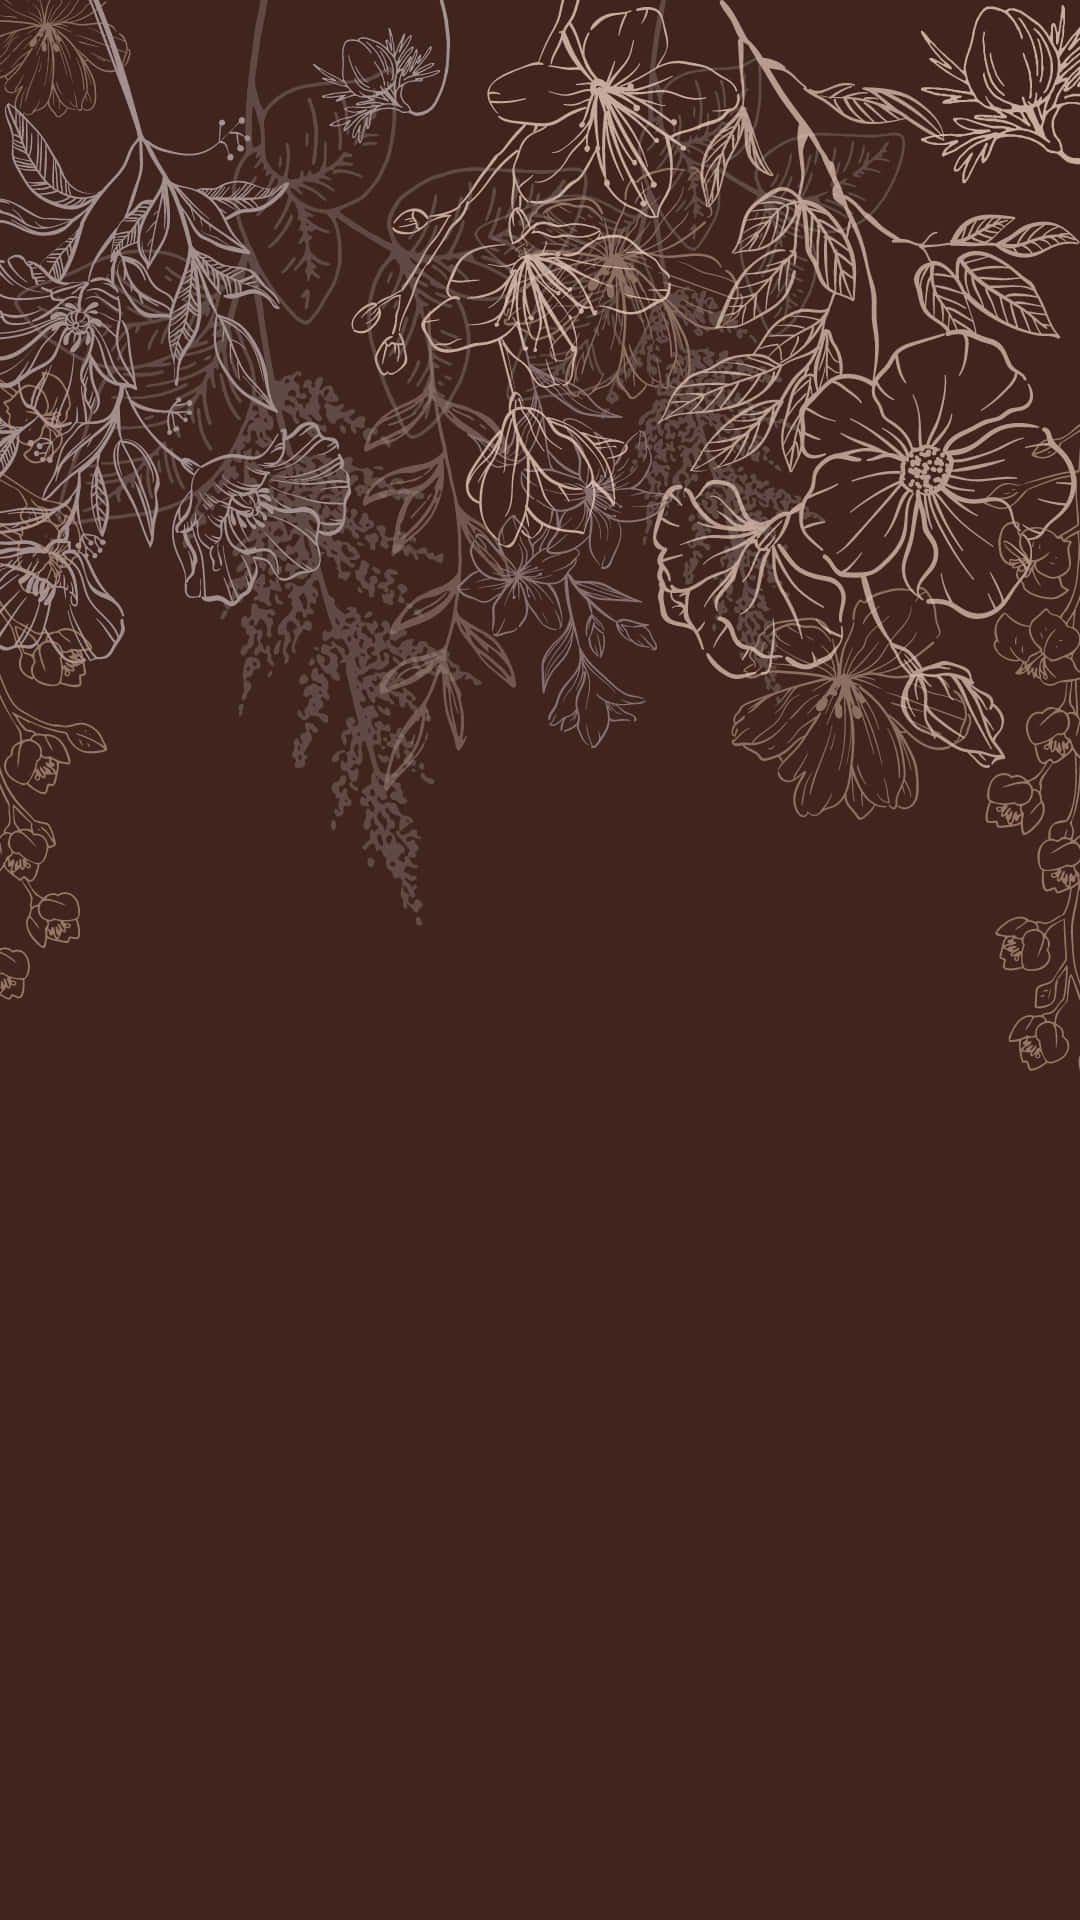 Embrace the Simplicity - Floral Minimalist Brown Aesthetic Wallpaper